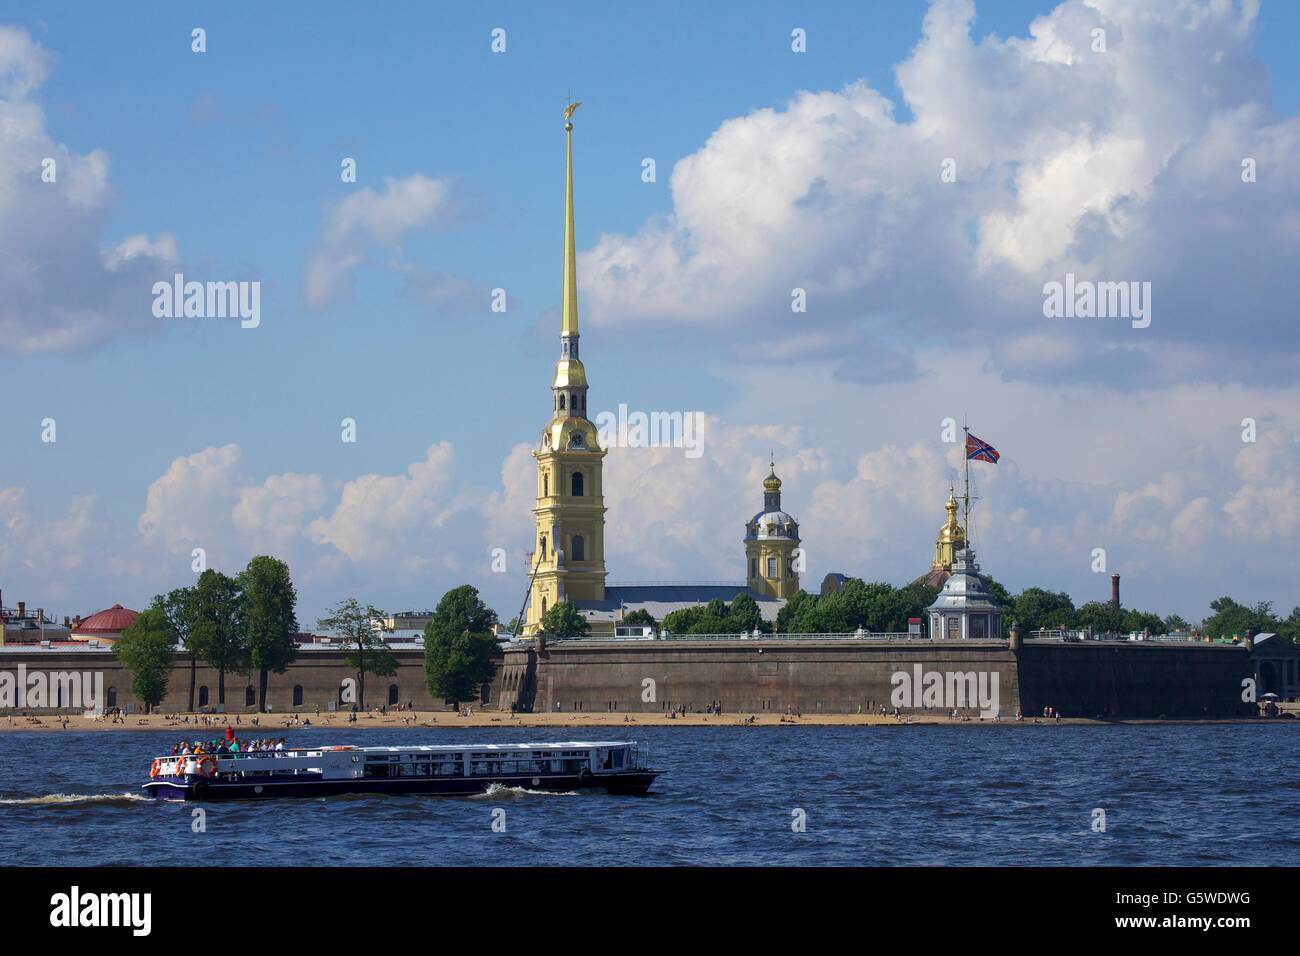 Tourist boat on the Neva River in front of Peter and Paul Fortress and Saint Peter and Saint Paul Cathedral, Saint Petersburg Stock Photo